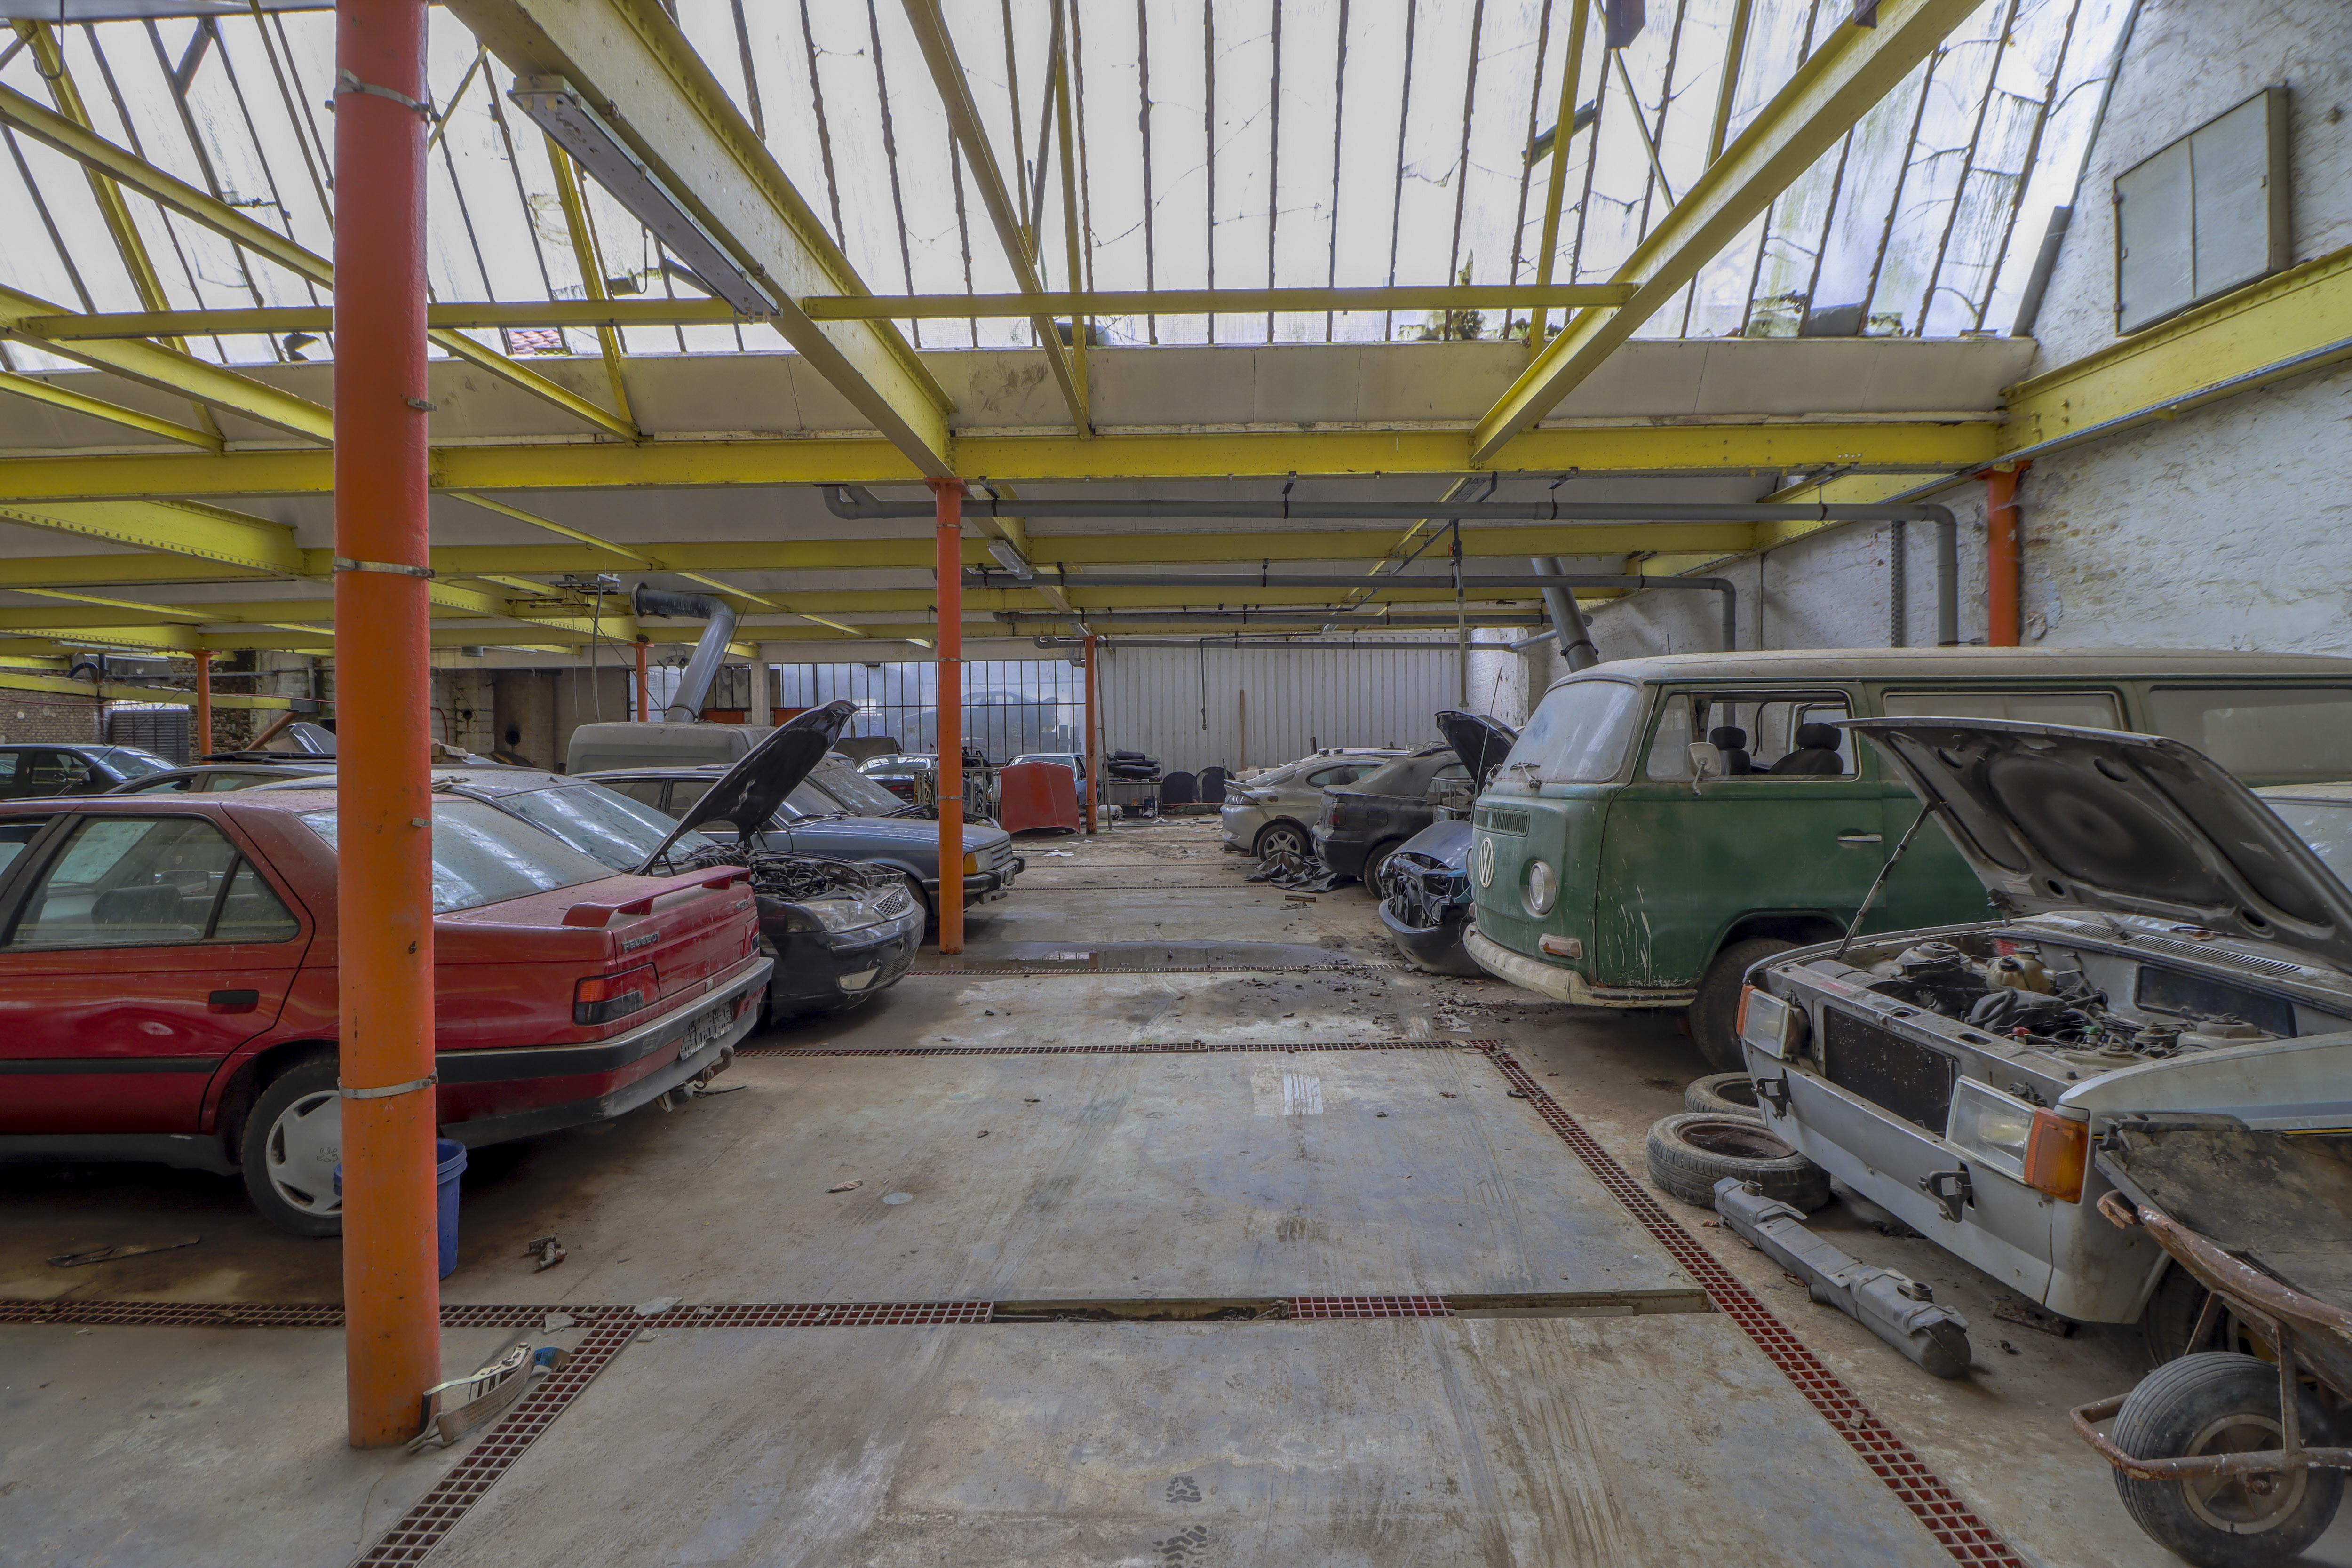 The classic VW campervan can be seen just to the right of the picture, and could make a good restoration project for the right owner